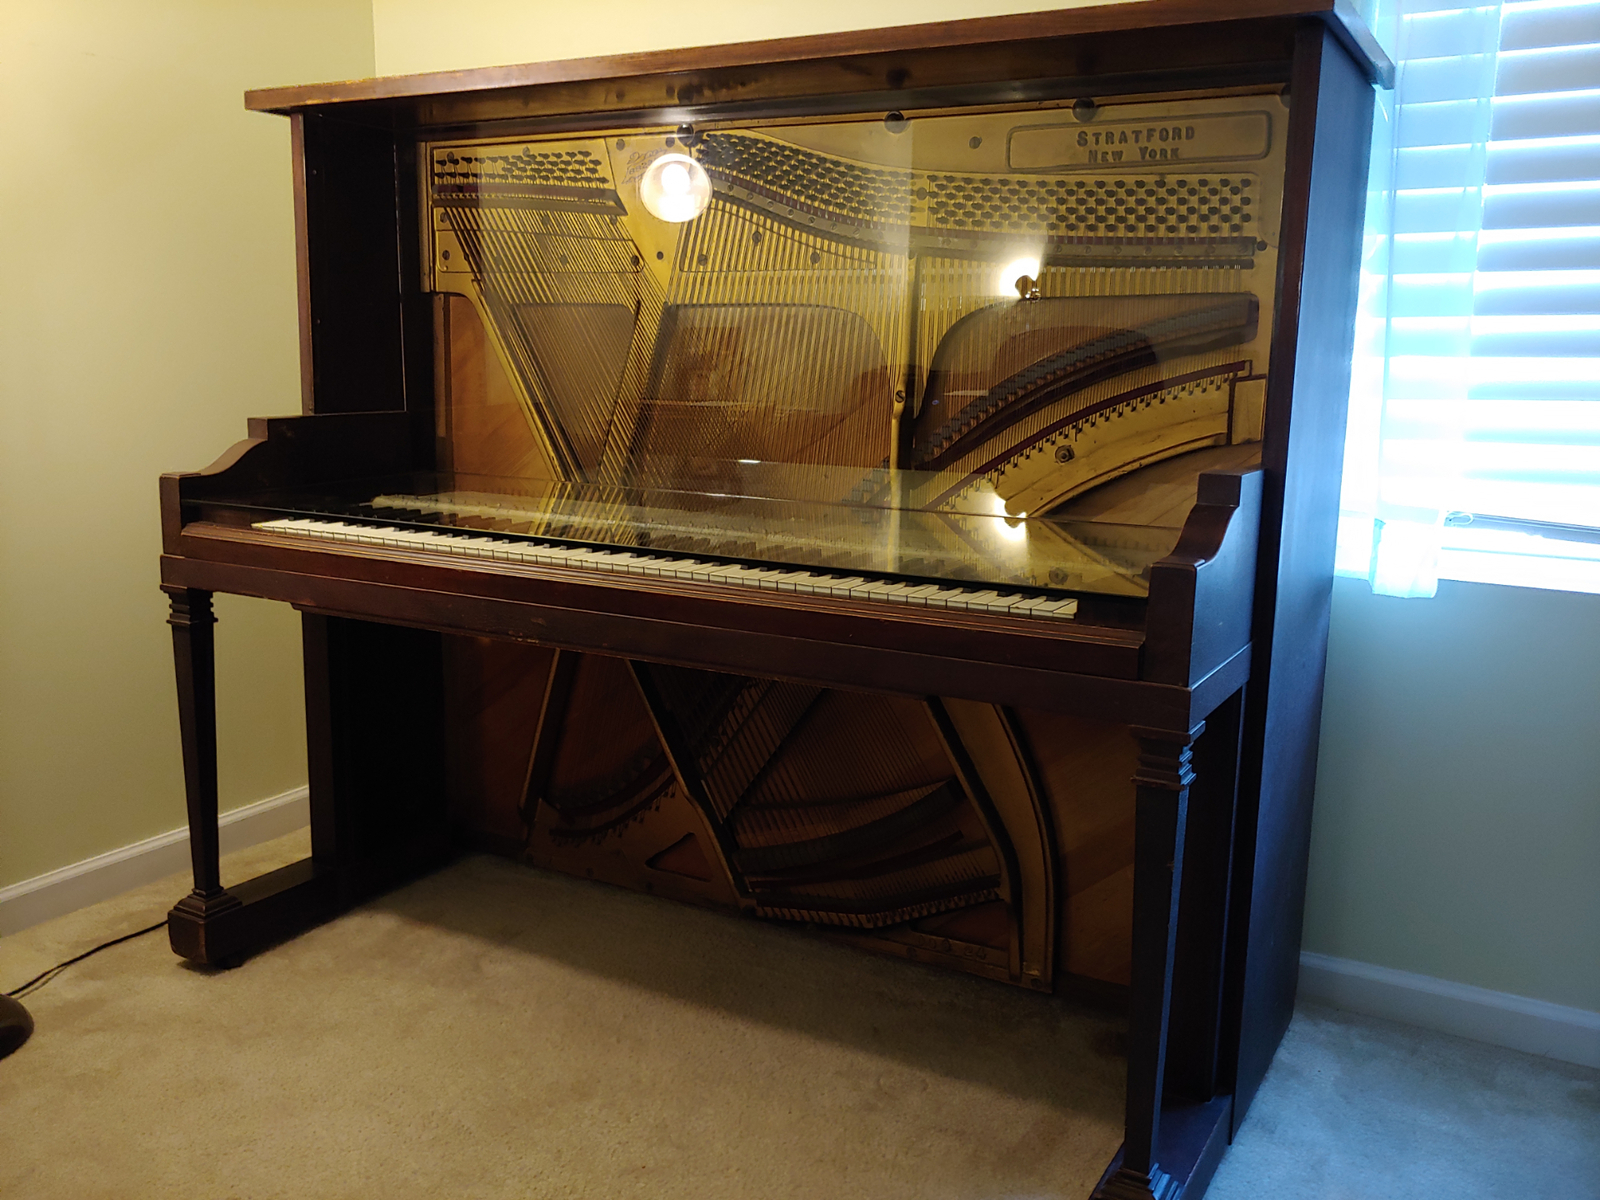 Antique Piano converted to a desk with glass table top and glass backsplash.